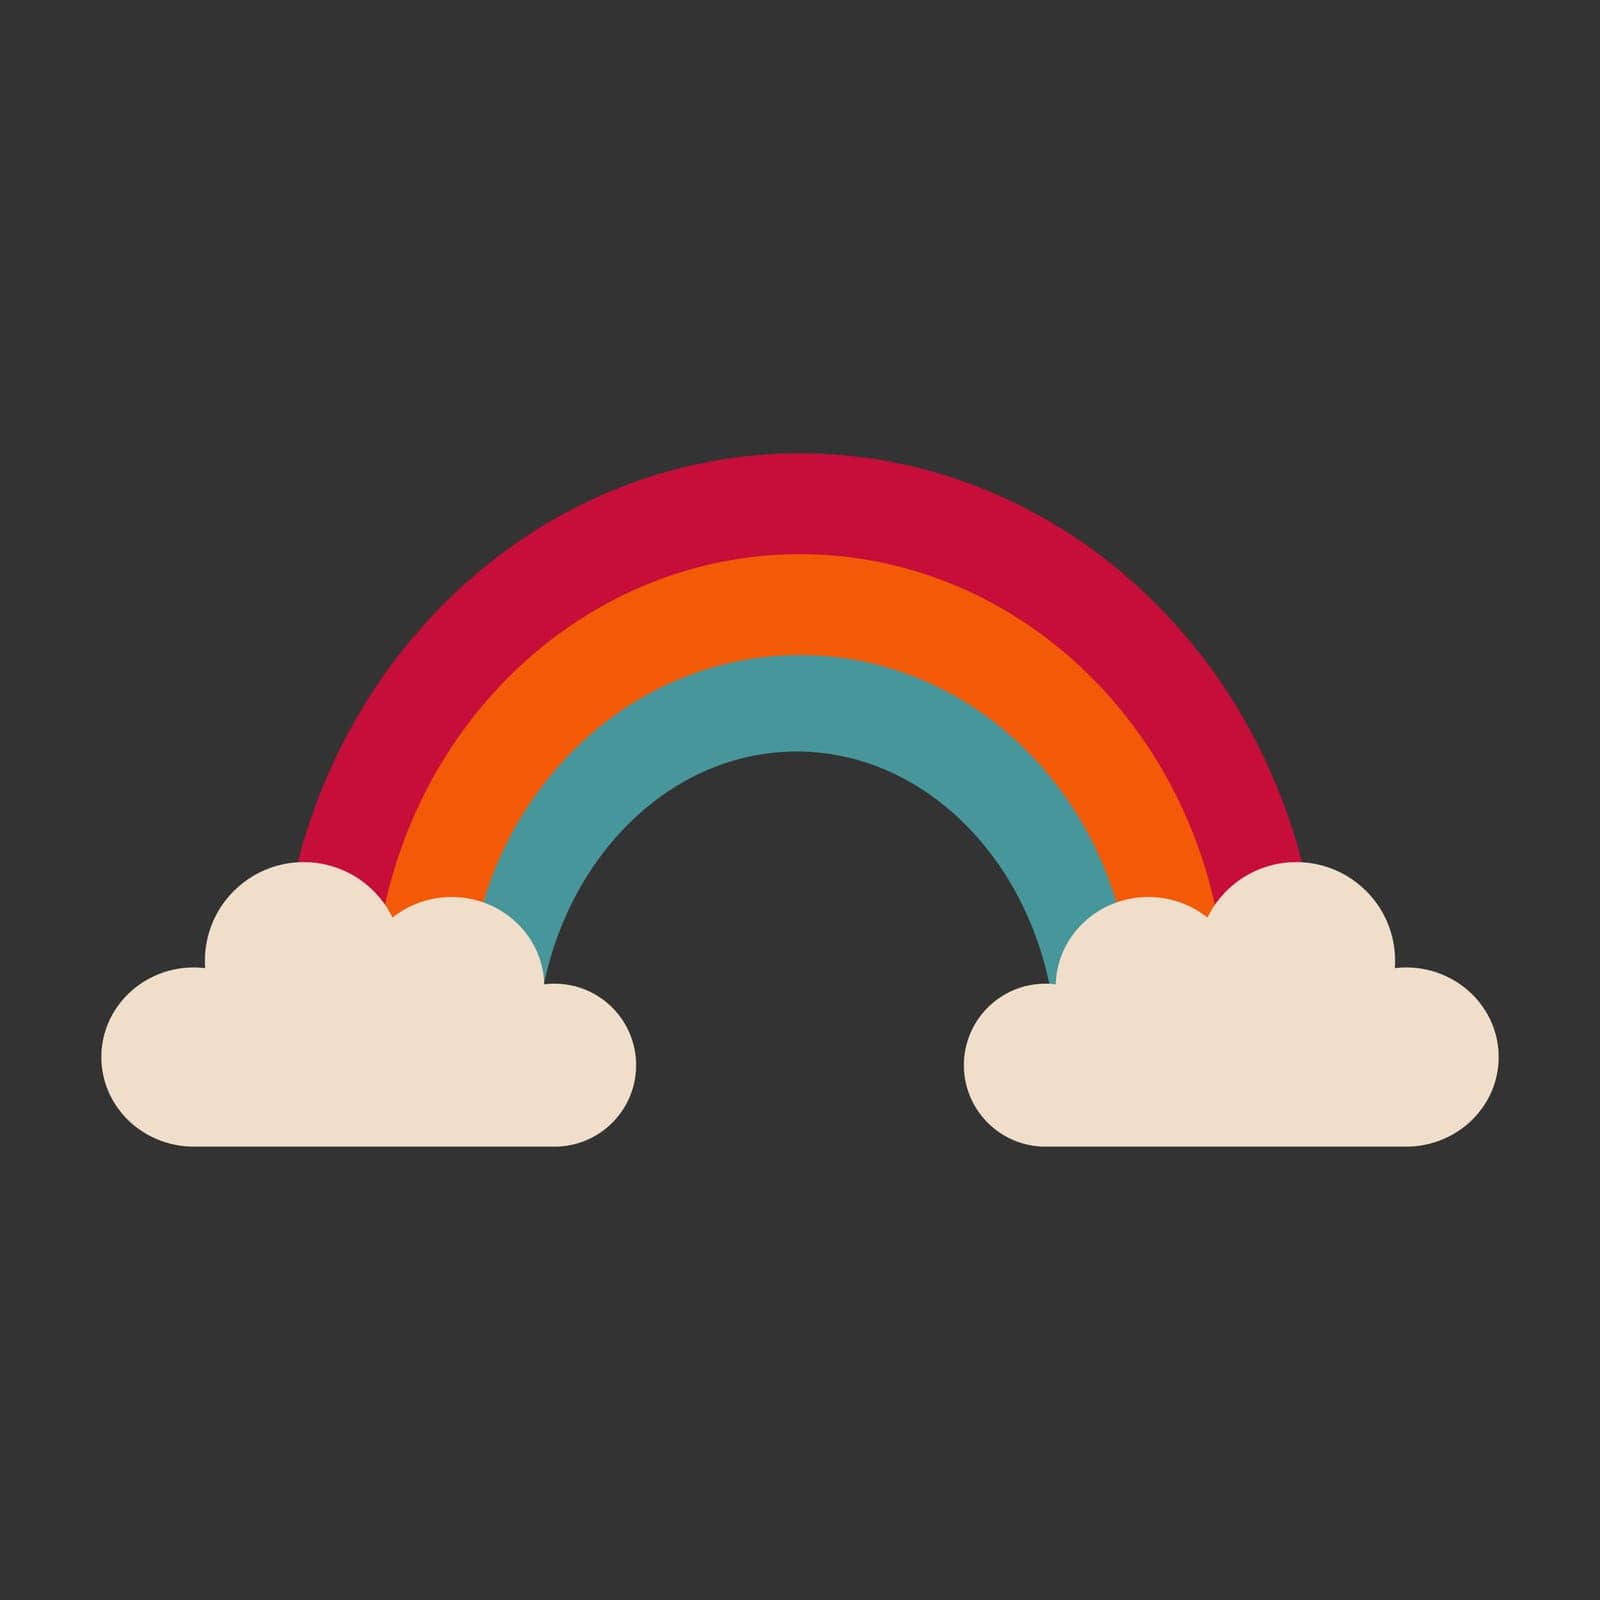 Illustration of a rainbow and two clouds. Dark tones. Vector image.